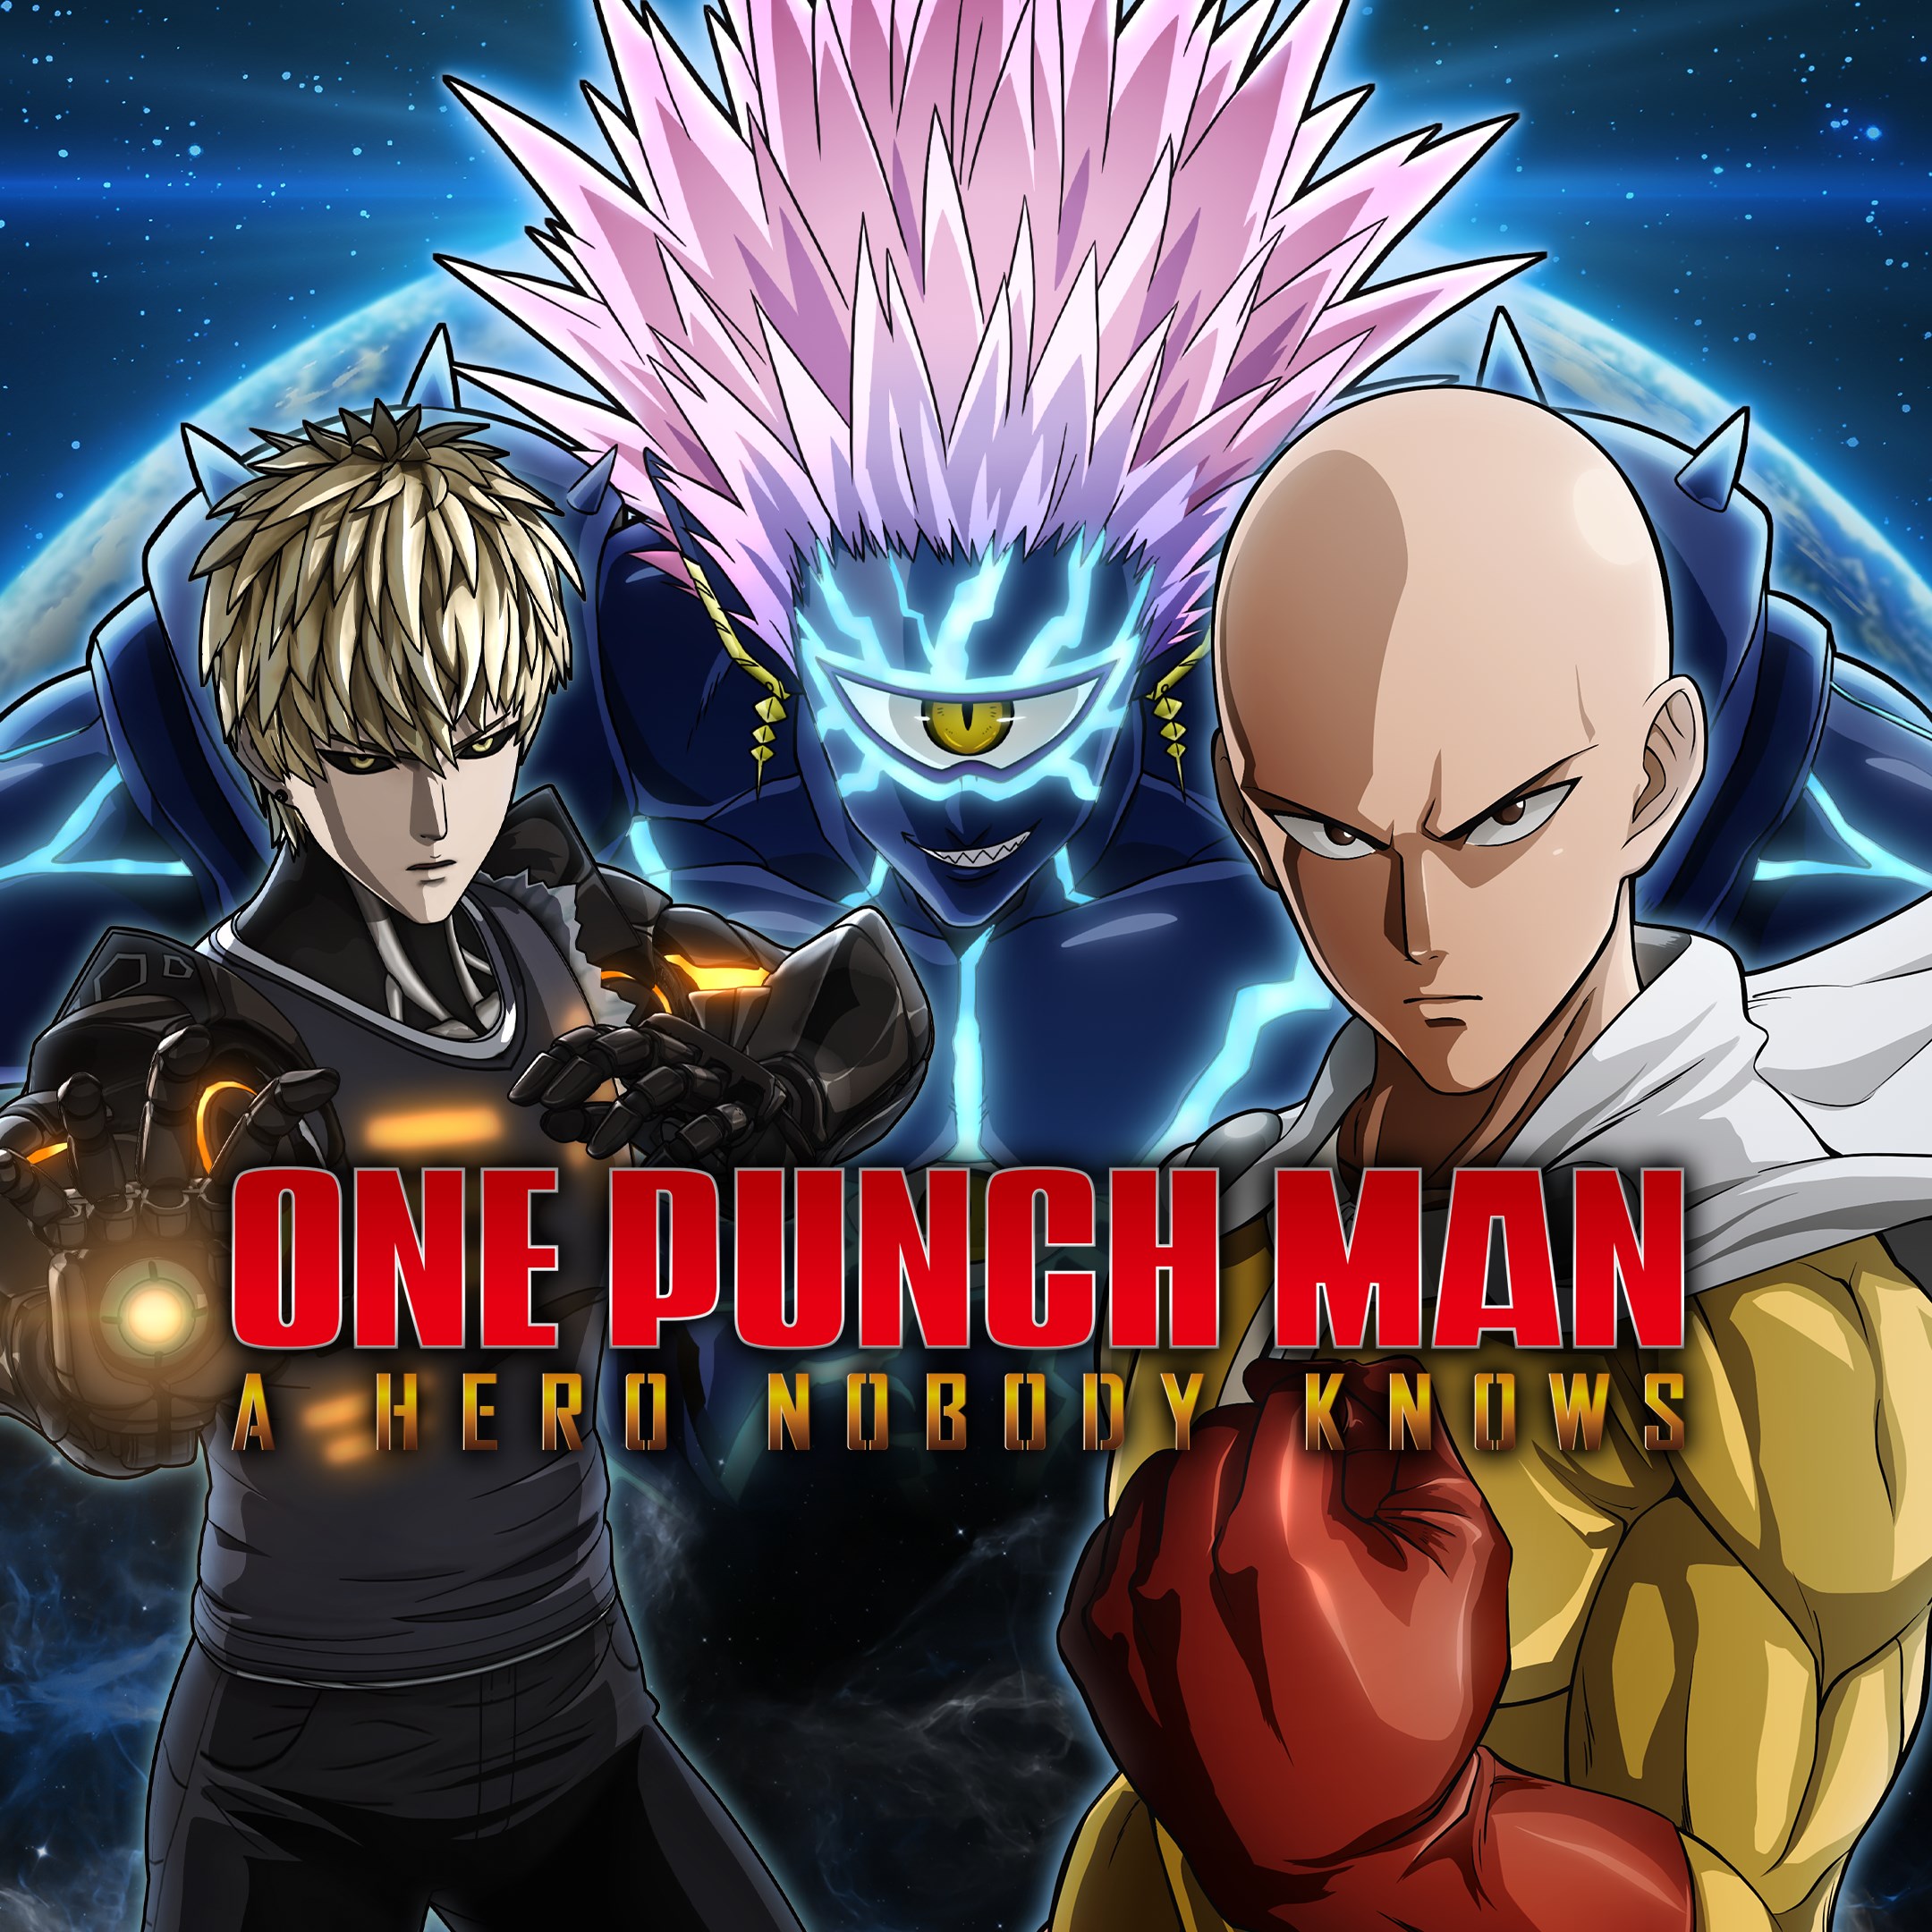 ONE PUNCH MAN: A HERO NOBODY KNOWS Pre-Order